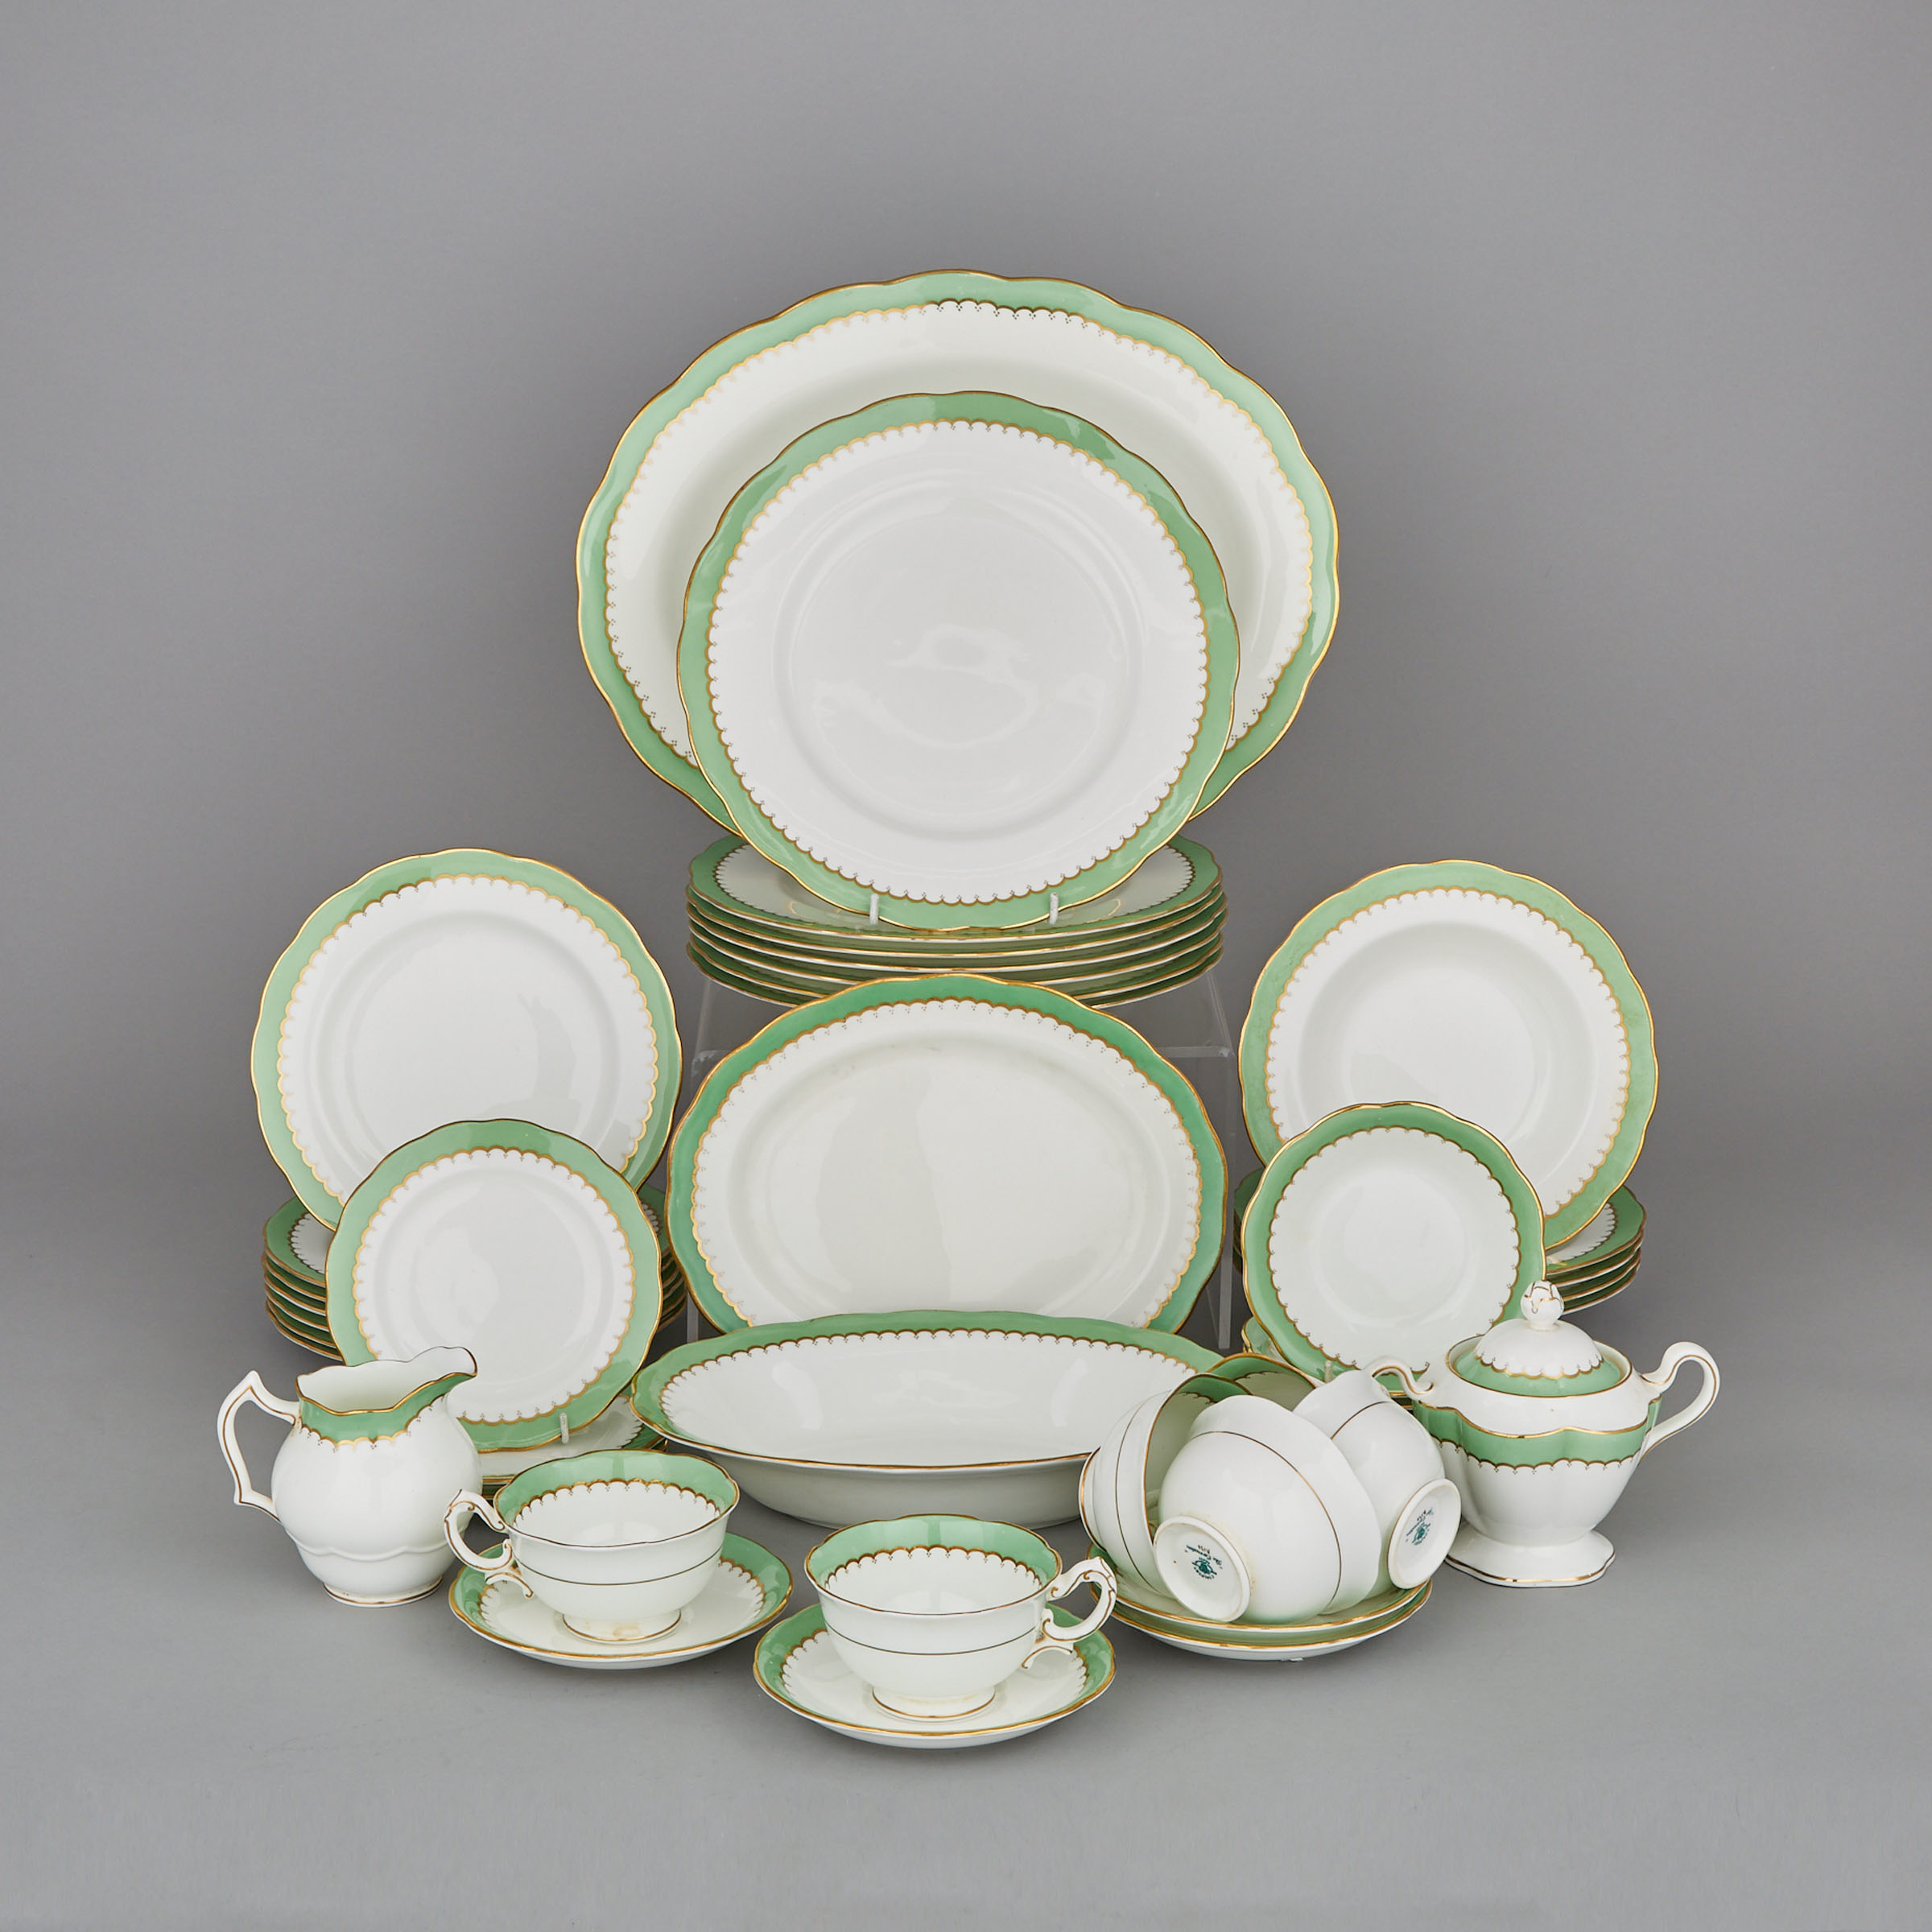 Apple Green and Gilt 'The Coronation' Pattern Part-Service, mainly Coalport, 20th century